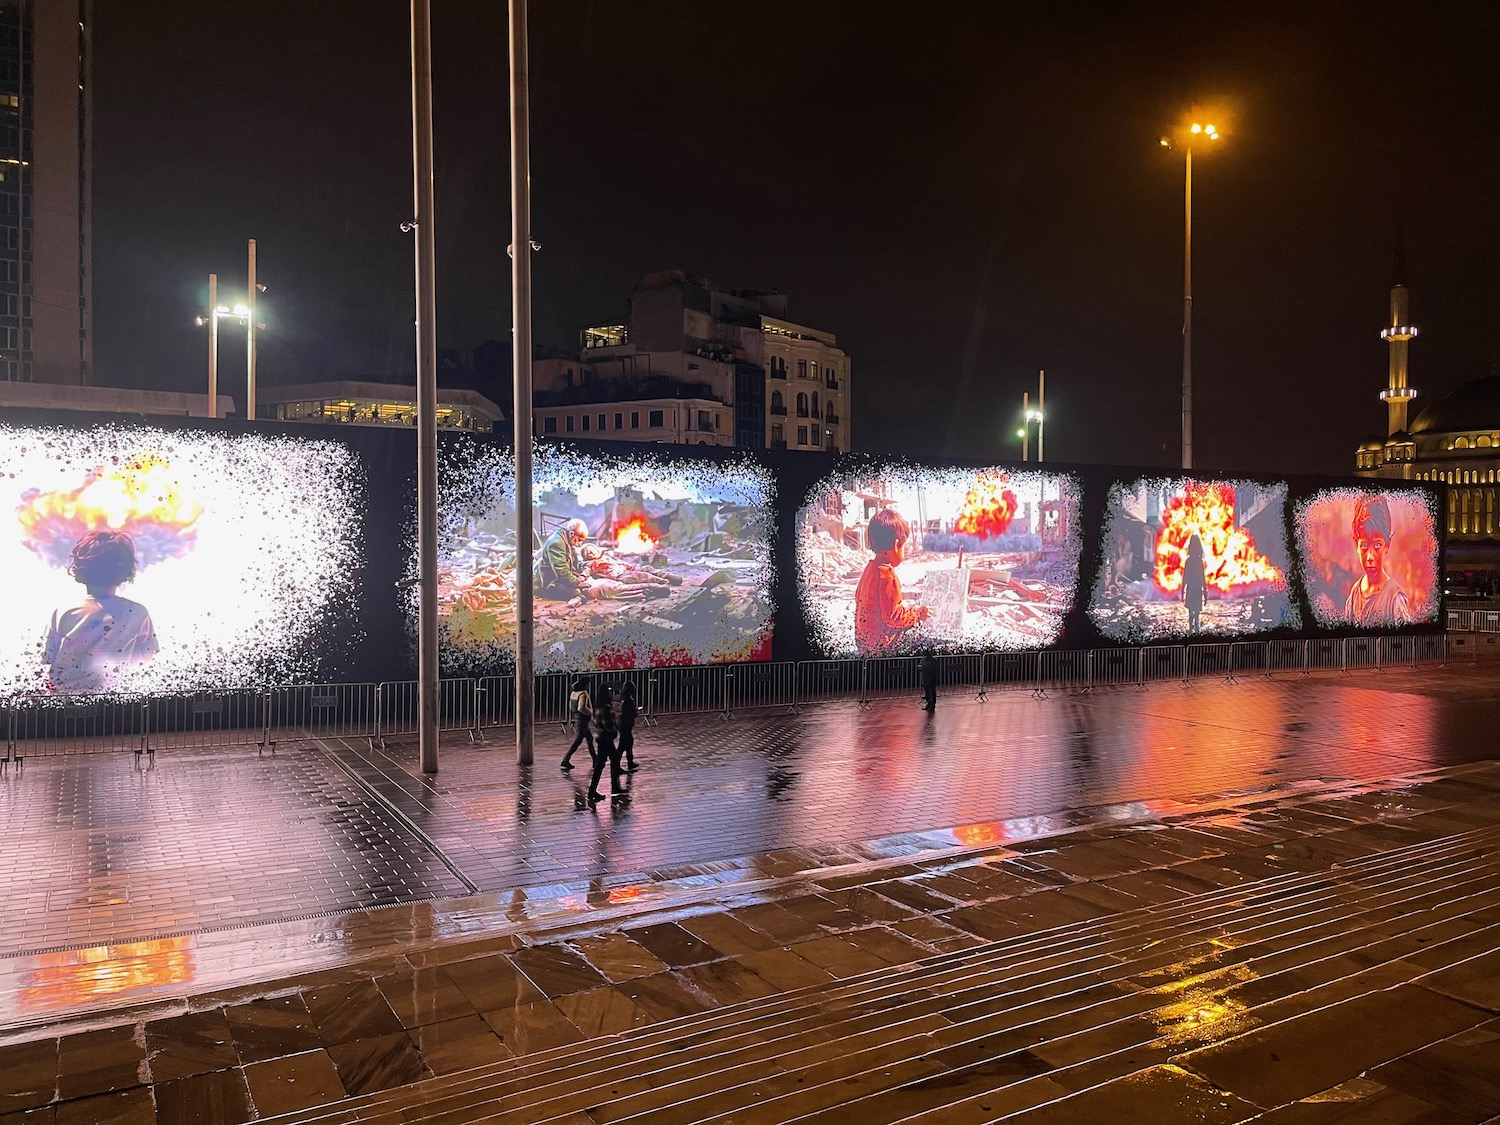 a group of people walking on a wet sidewalk with large screens